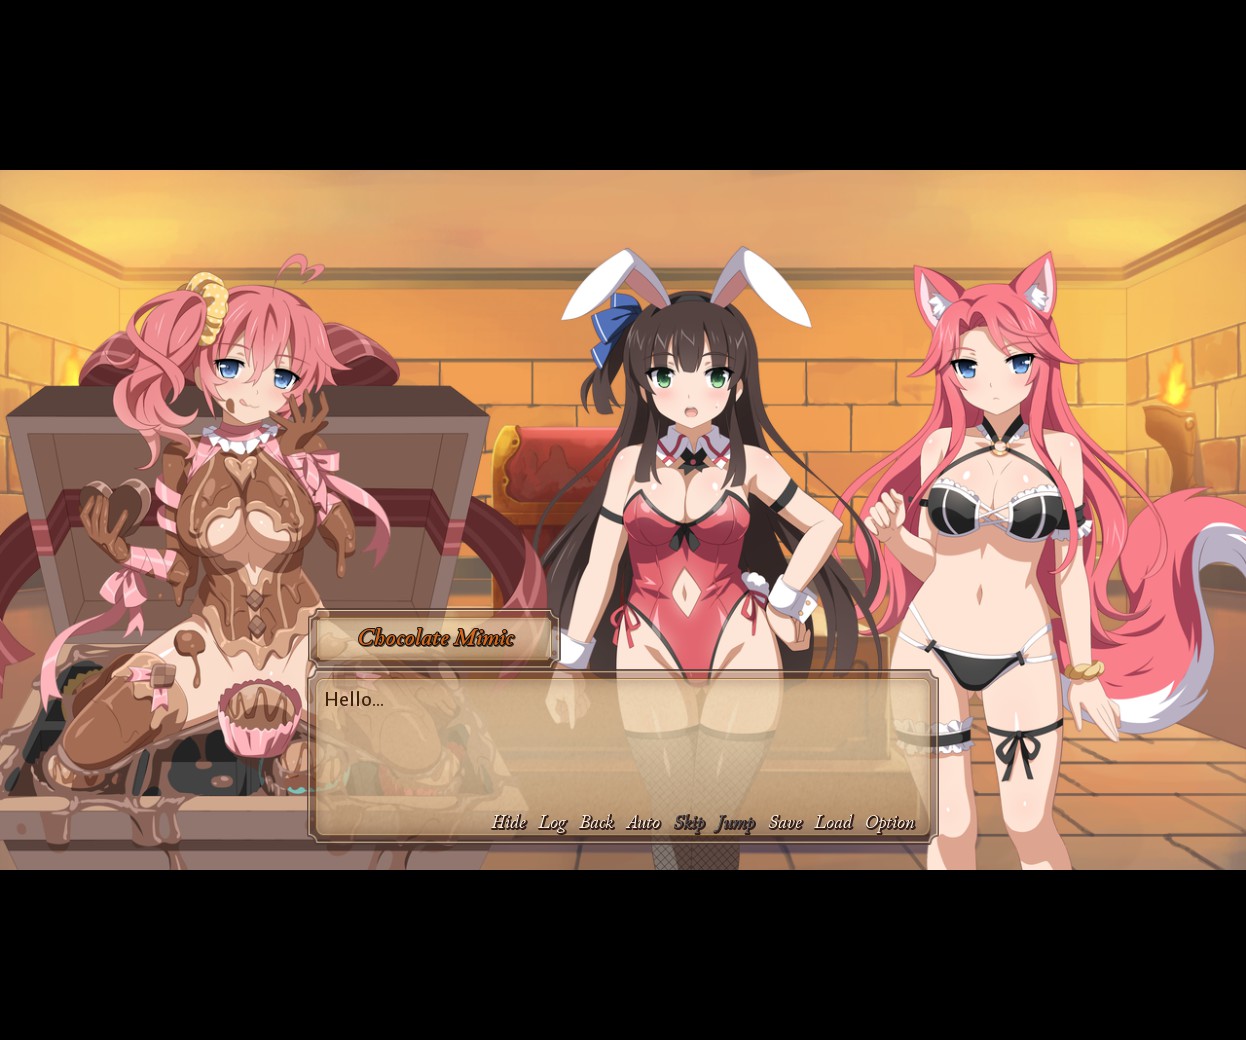 adult patches for steam sakura dungeon